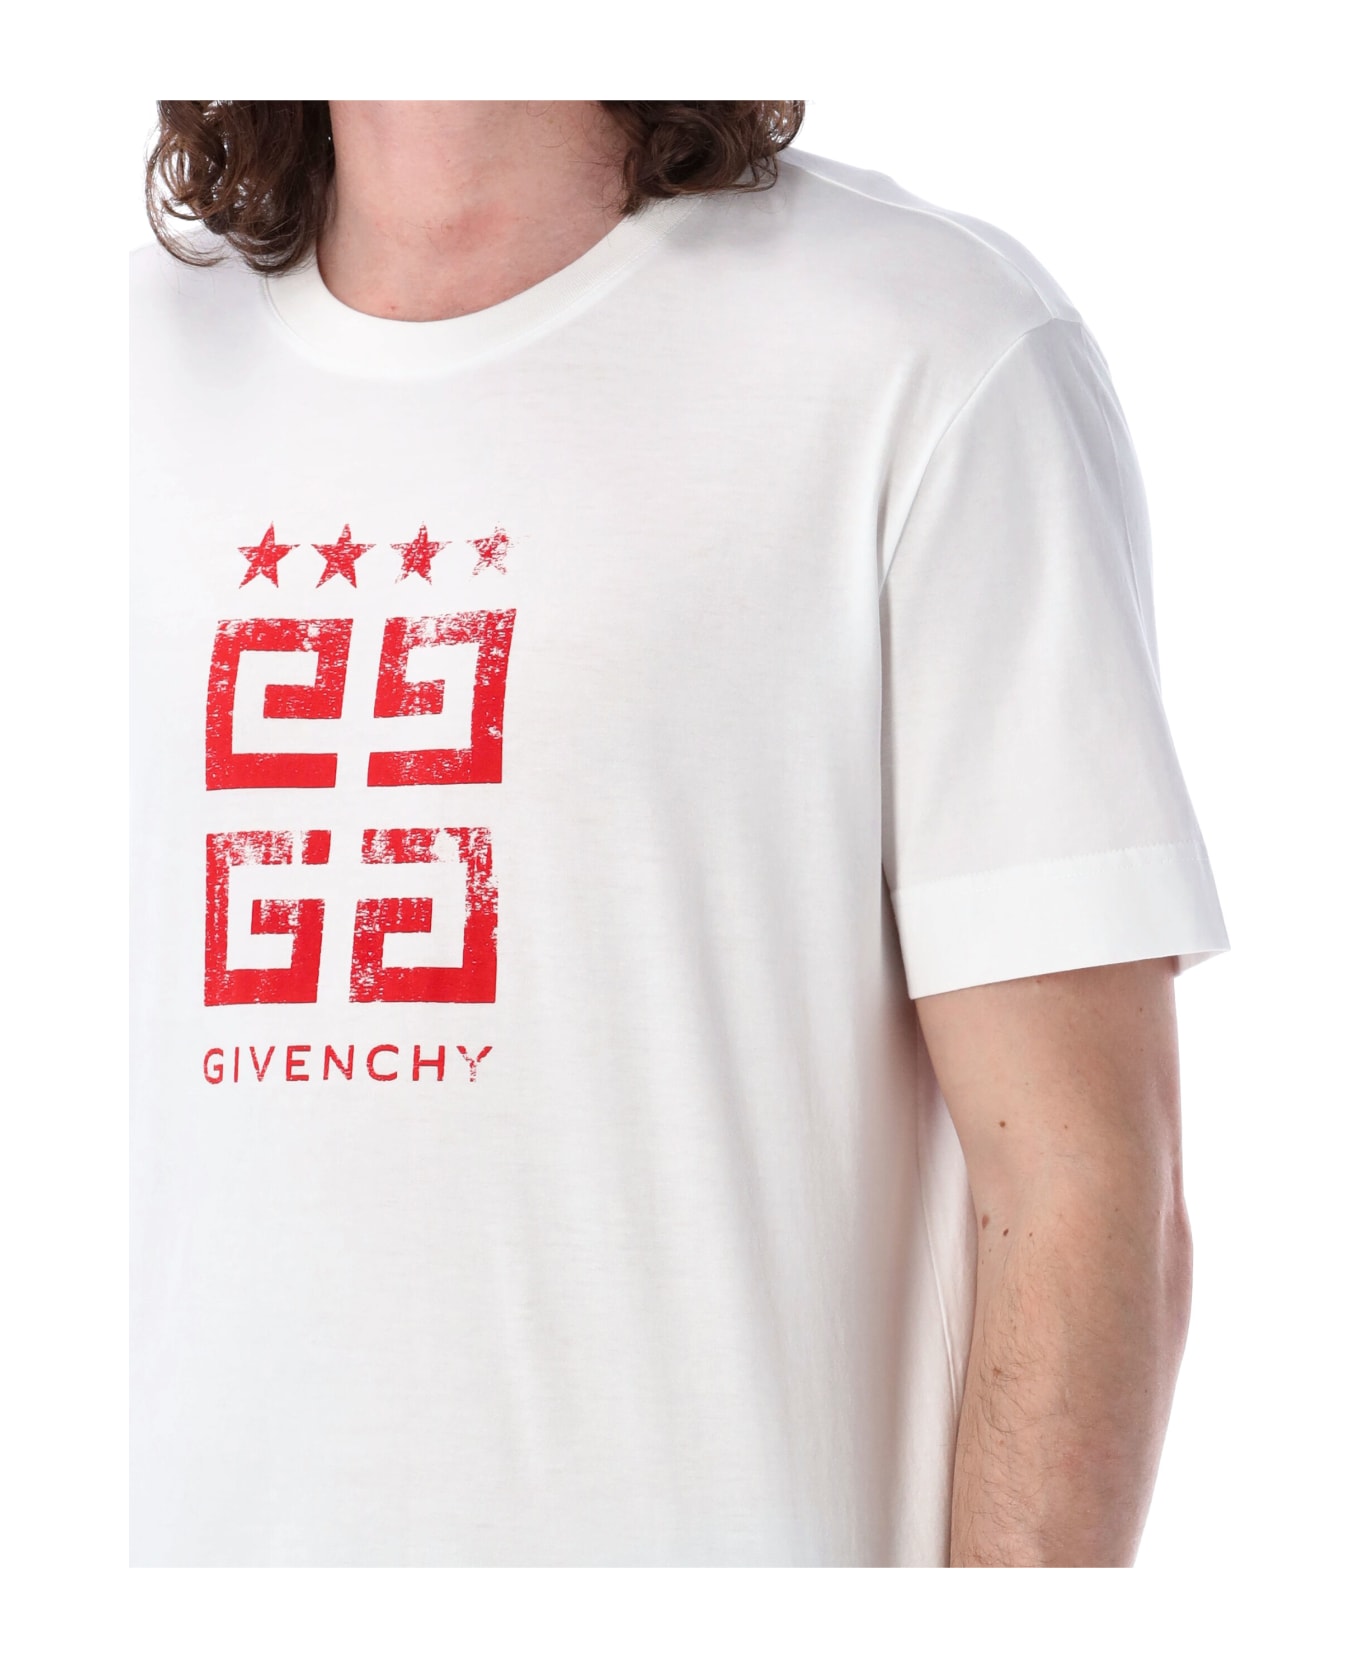 Givenchy 4g Stars T-shirt - WHITE/RED シャツ